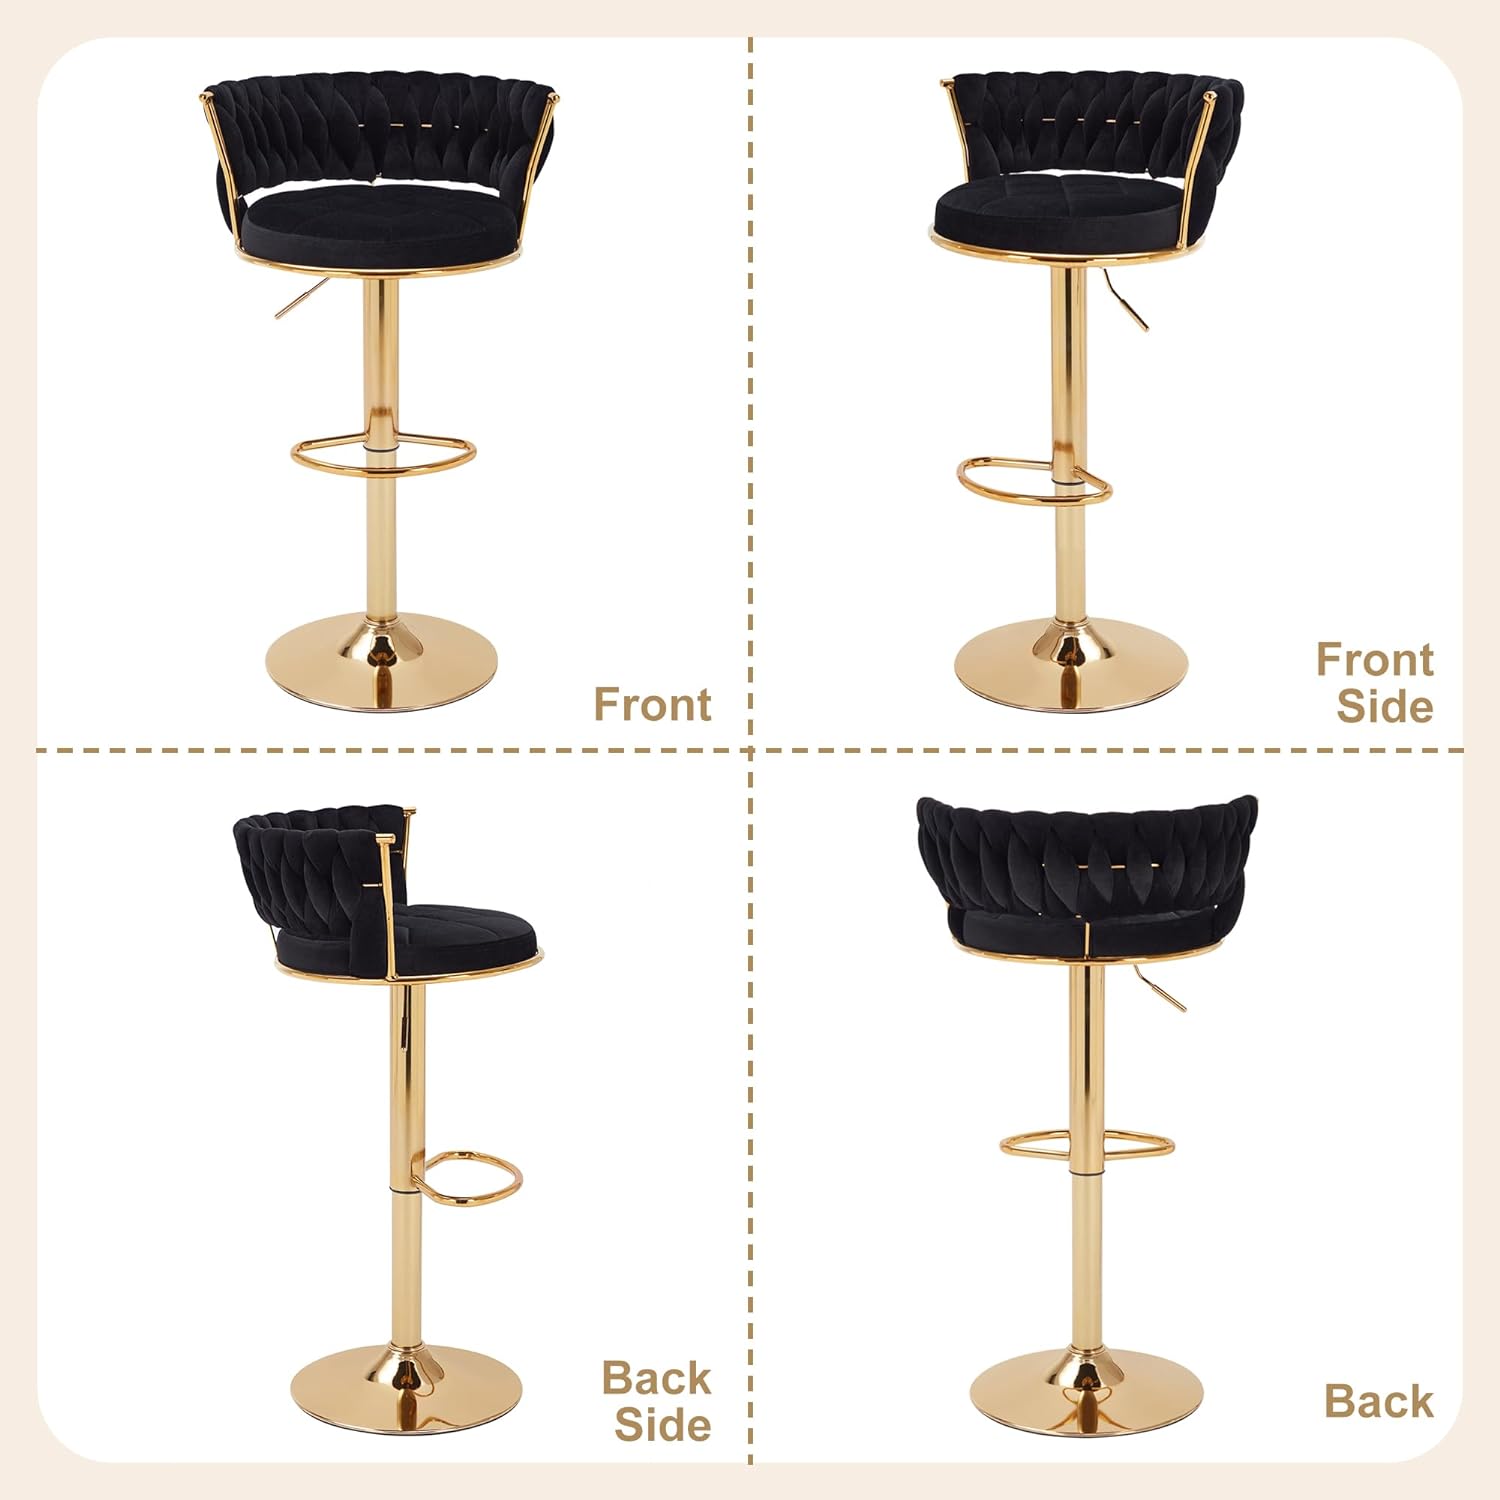 VECELO Bar Stools Set of 2, Adjustable Barstools Counter Height Stools with Back and Arm